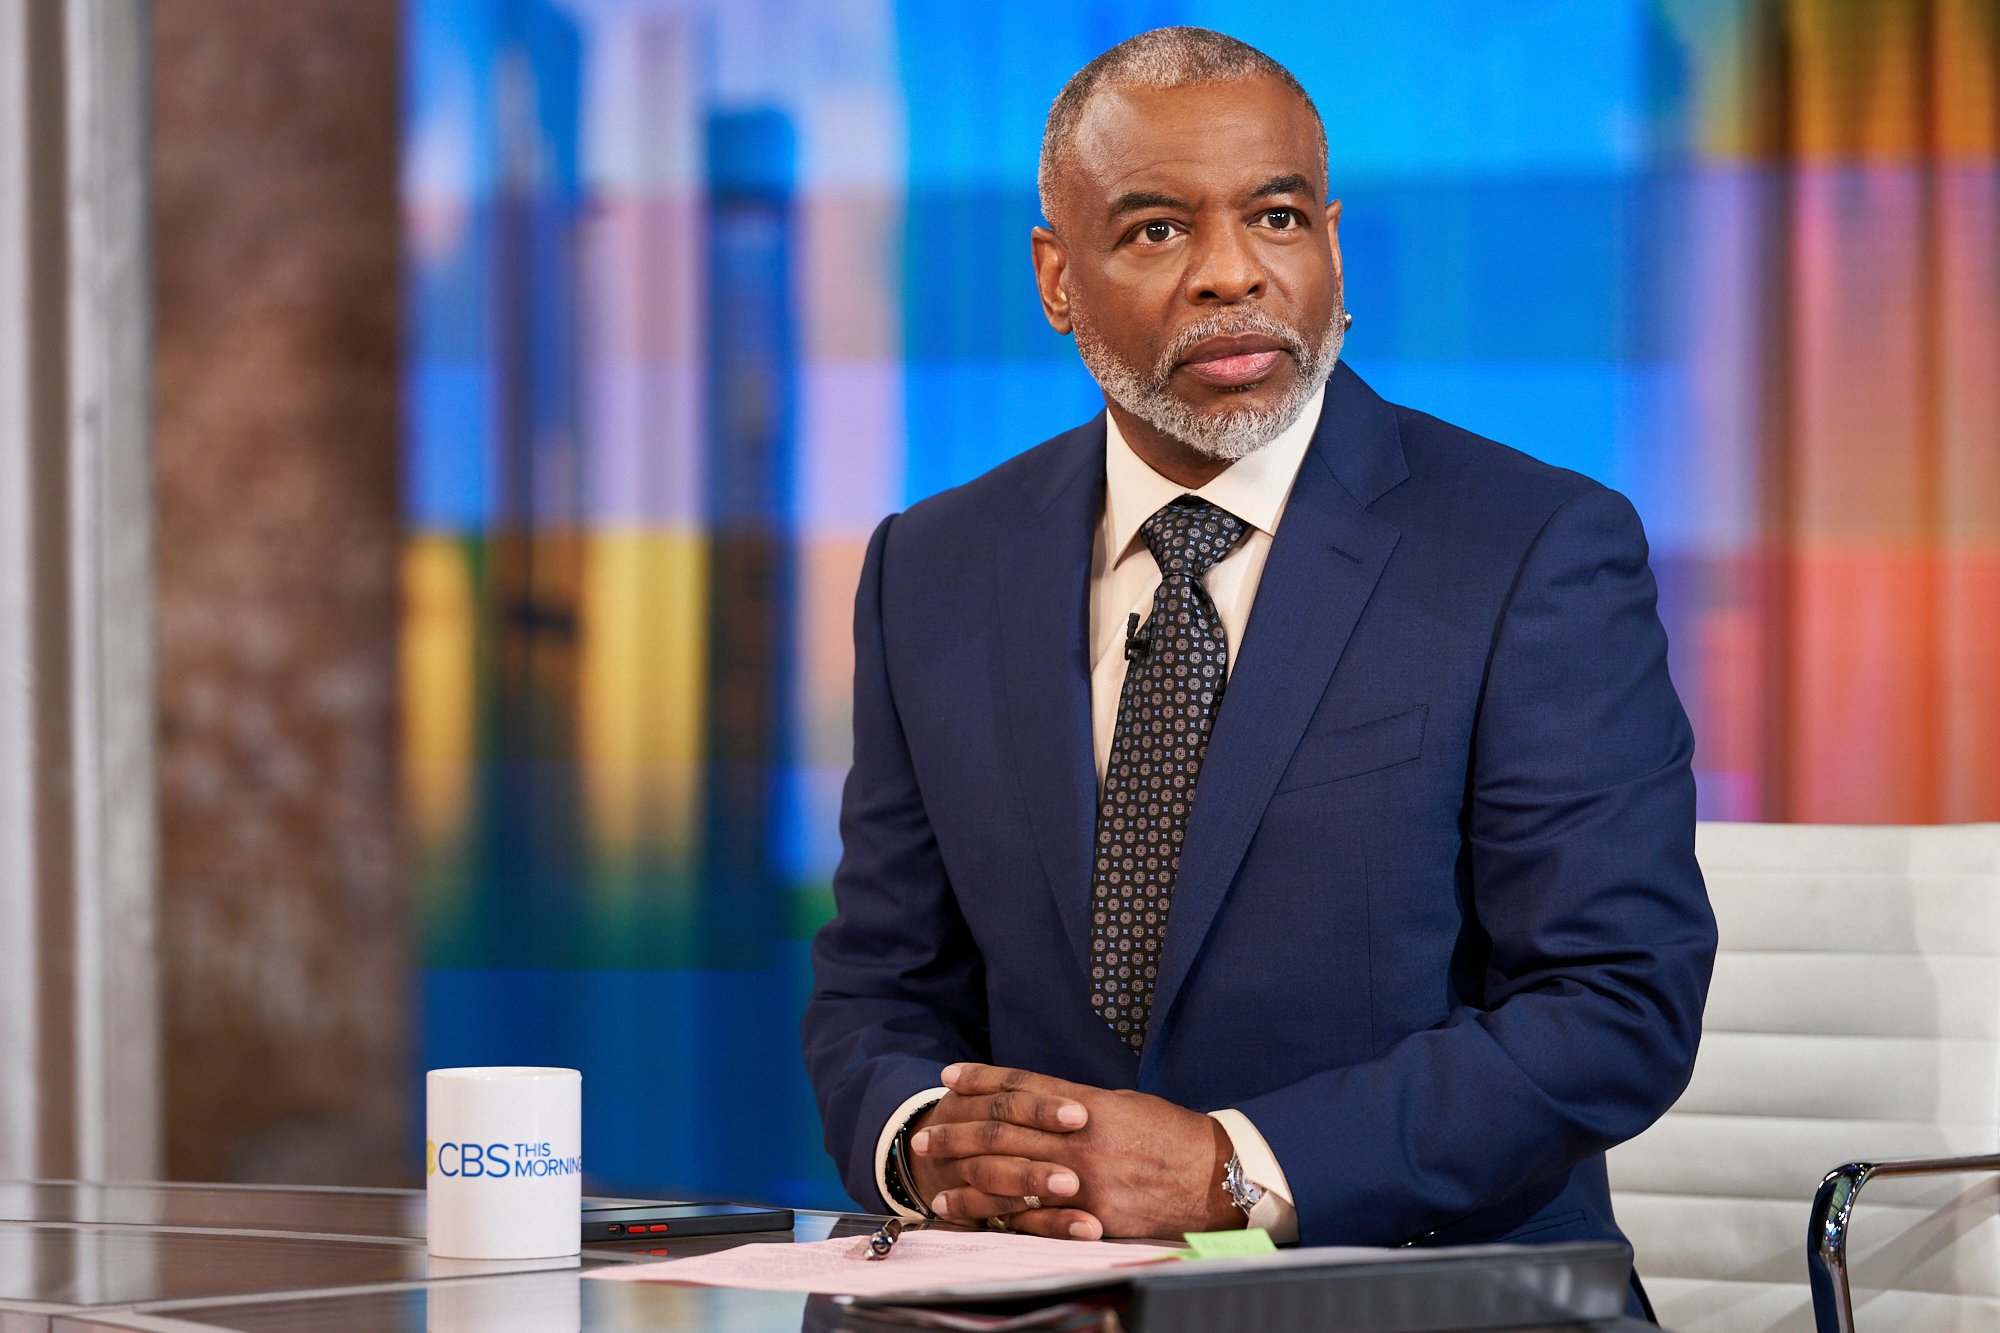 Actor LeVar Burton wears a navy blue suit and dark tie as he guest hosts on 'CBS This Morning' in May 2021.